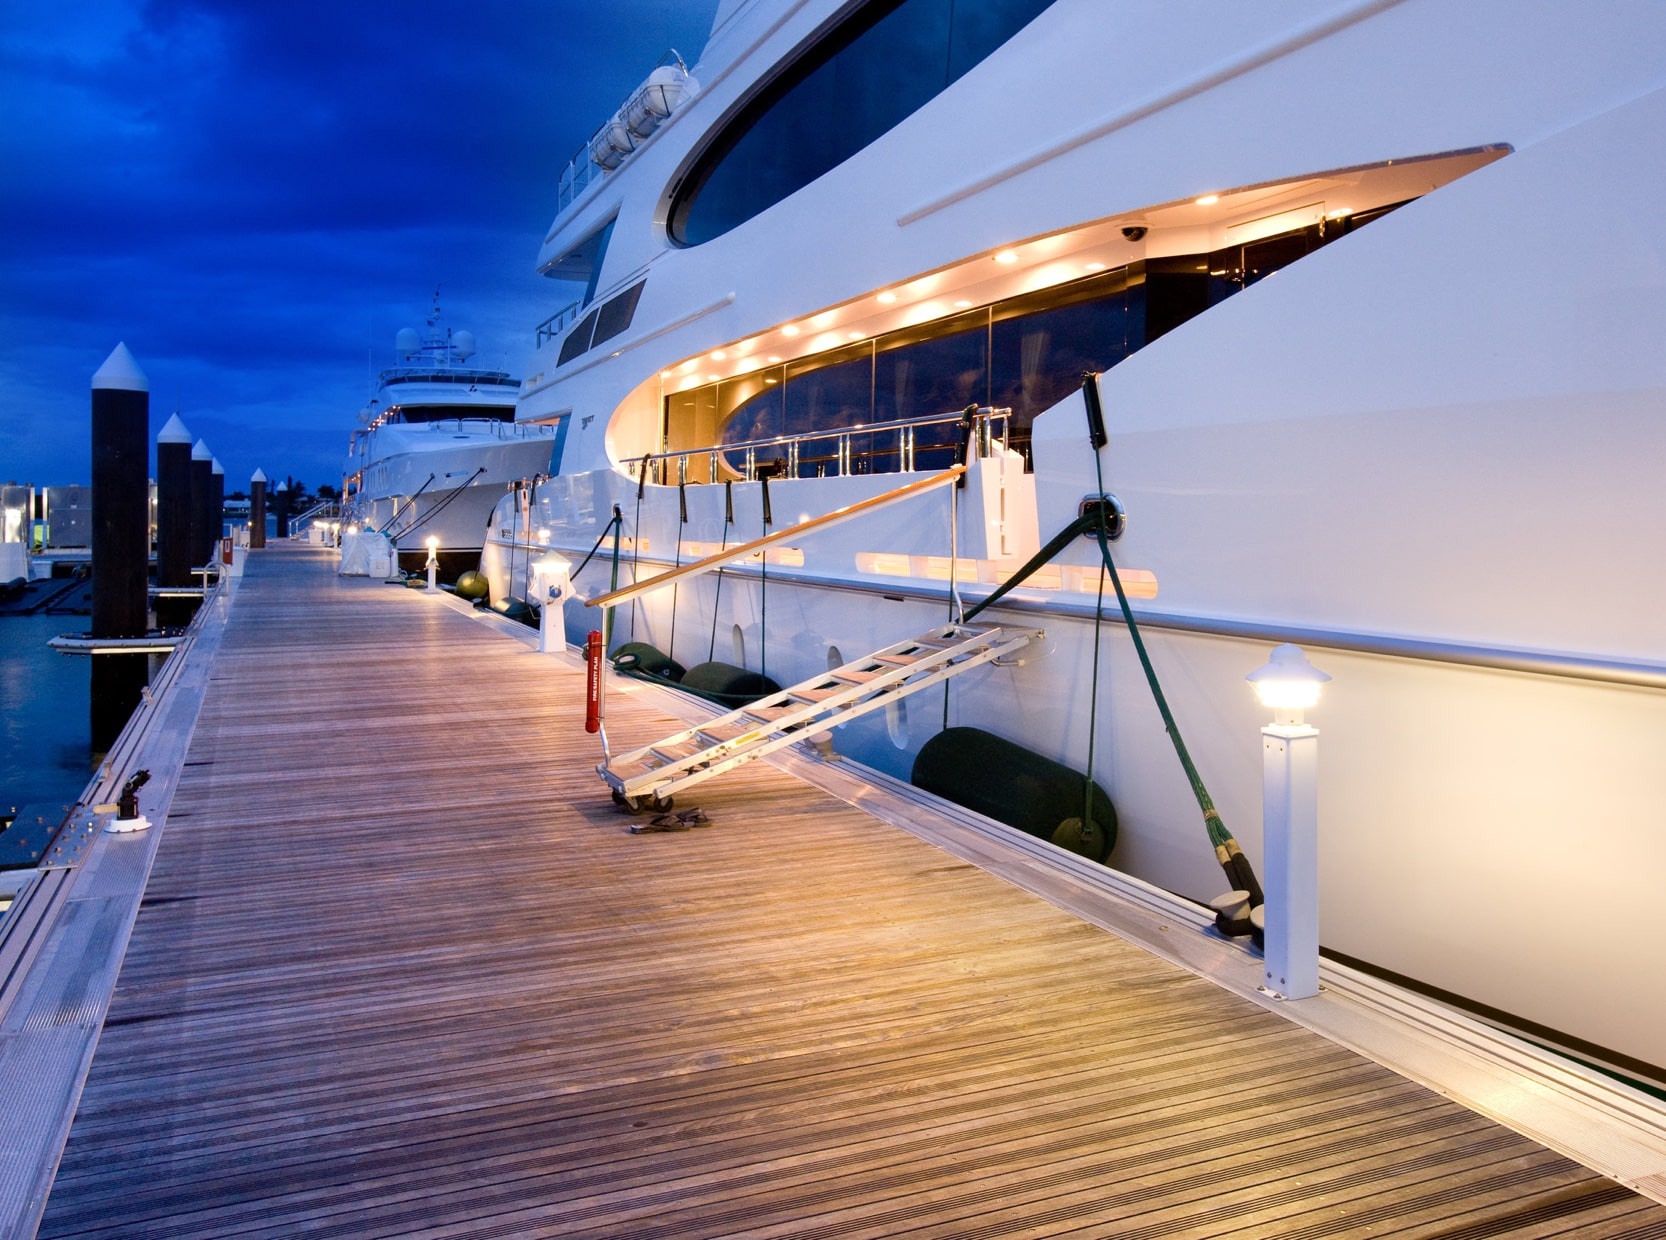 Aluminum floating dock with wood decking and large yachts moored